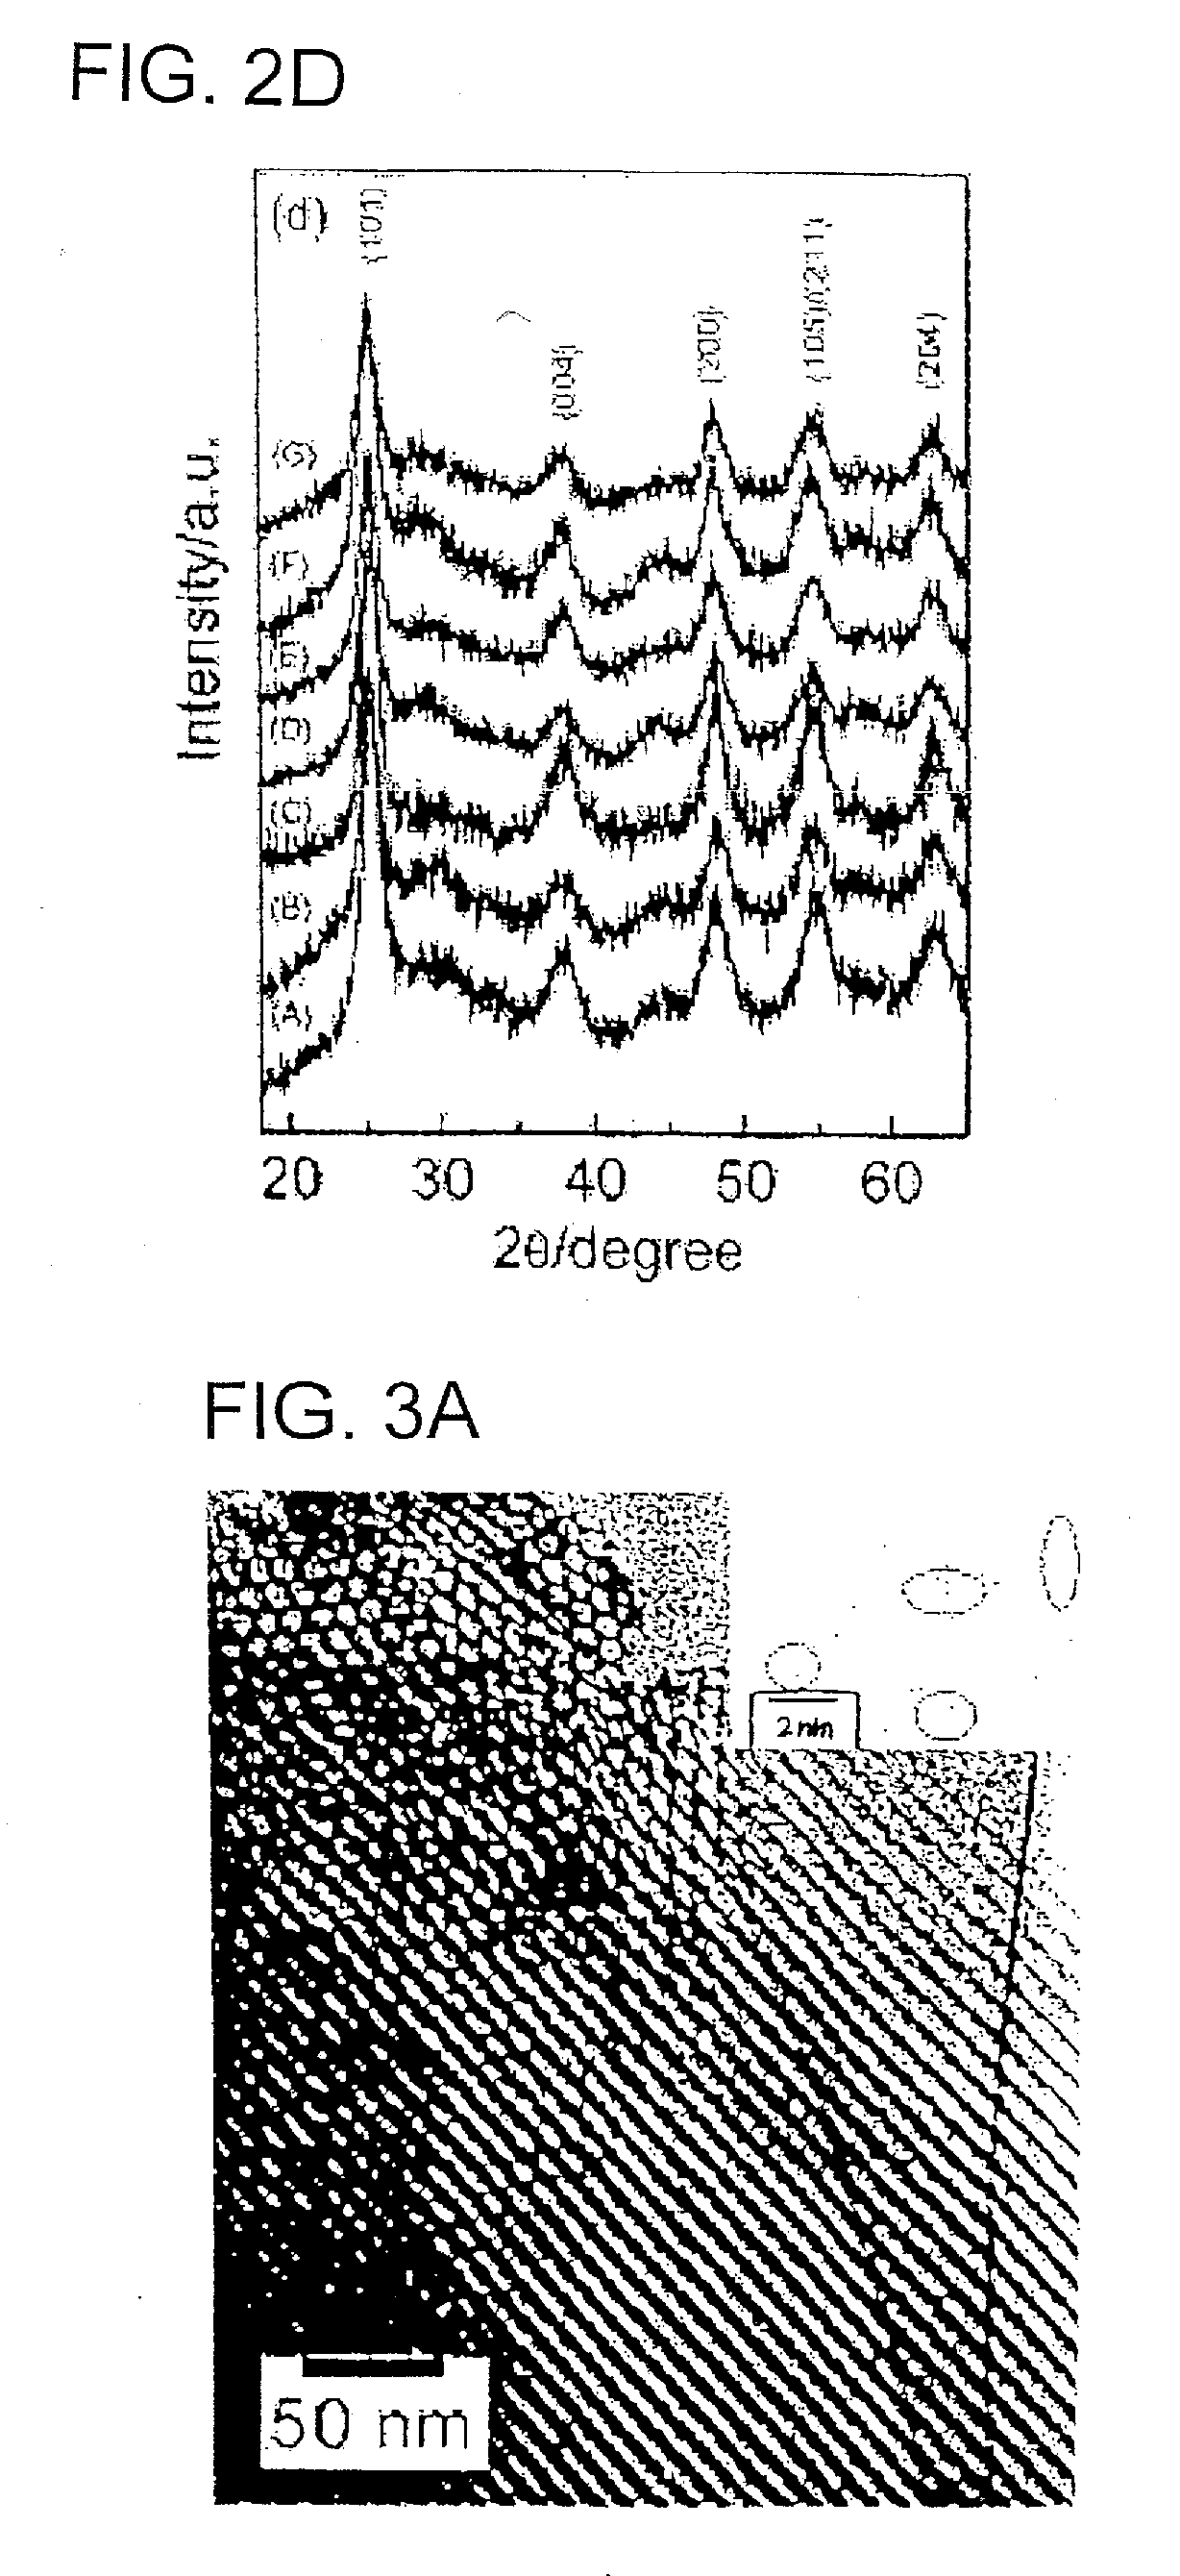 Nanocrystal oxide/glass composite mesoporous powder or thin film, process for producing the same, and utilizing the powder or thin film, various devices, secondary battery and lithium storing device